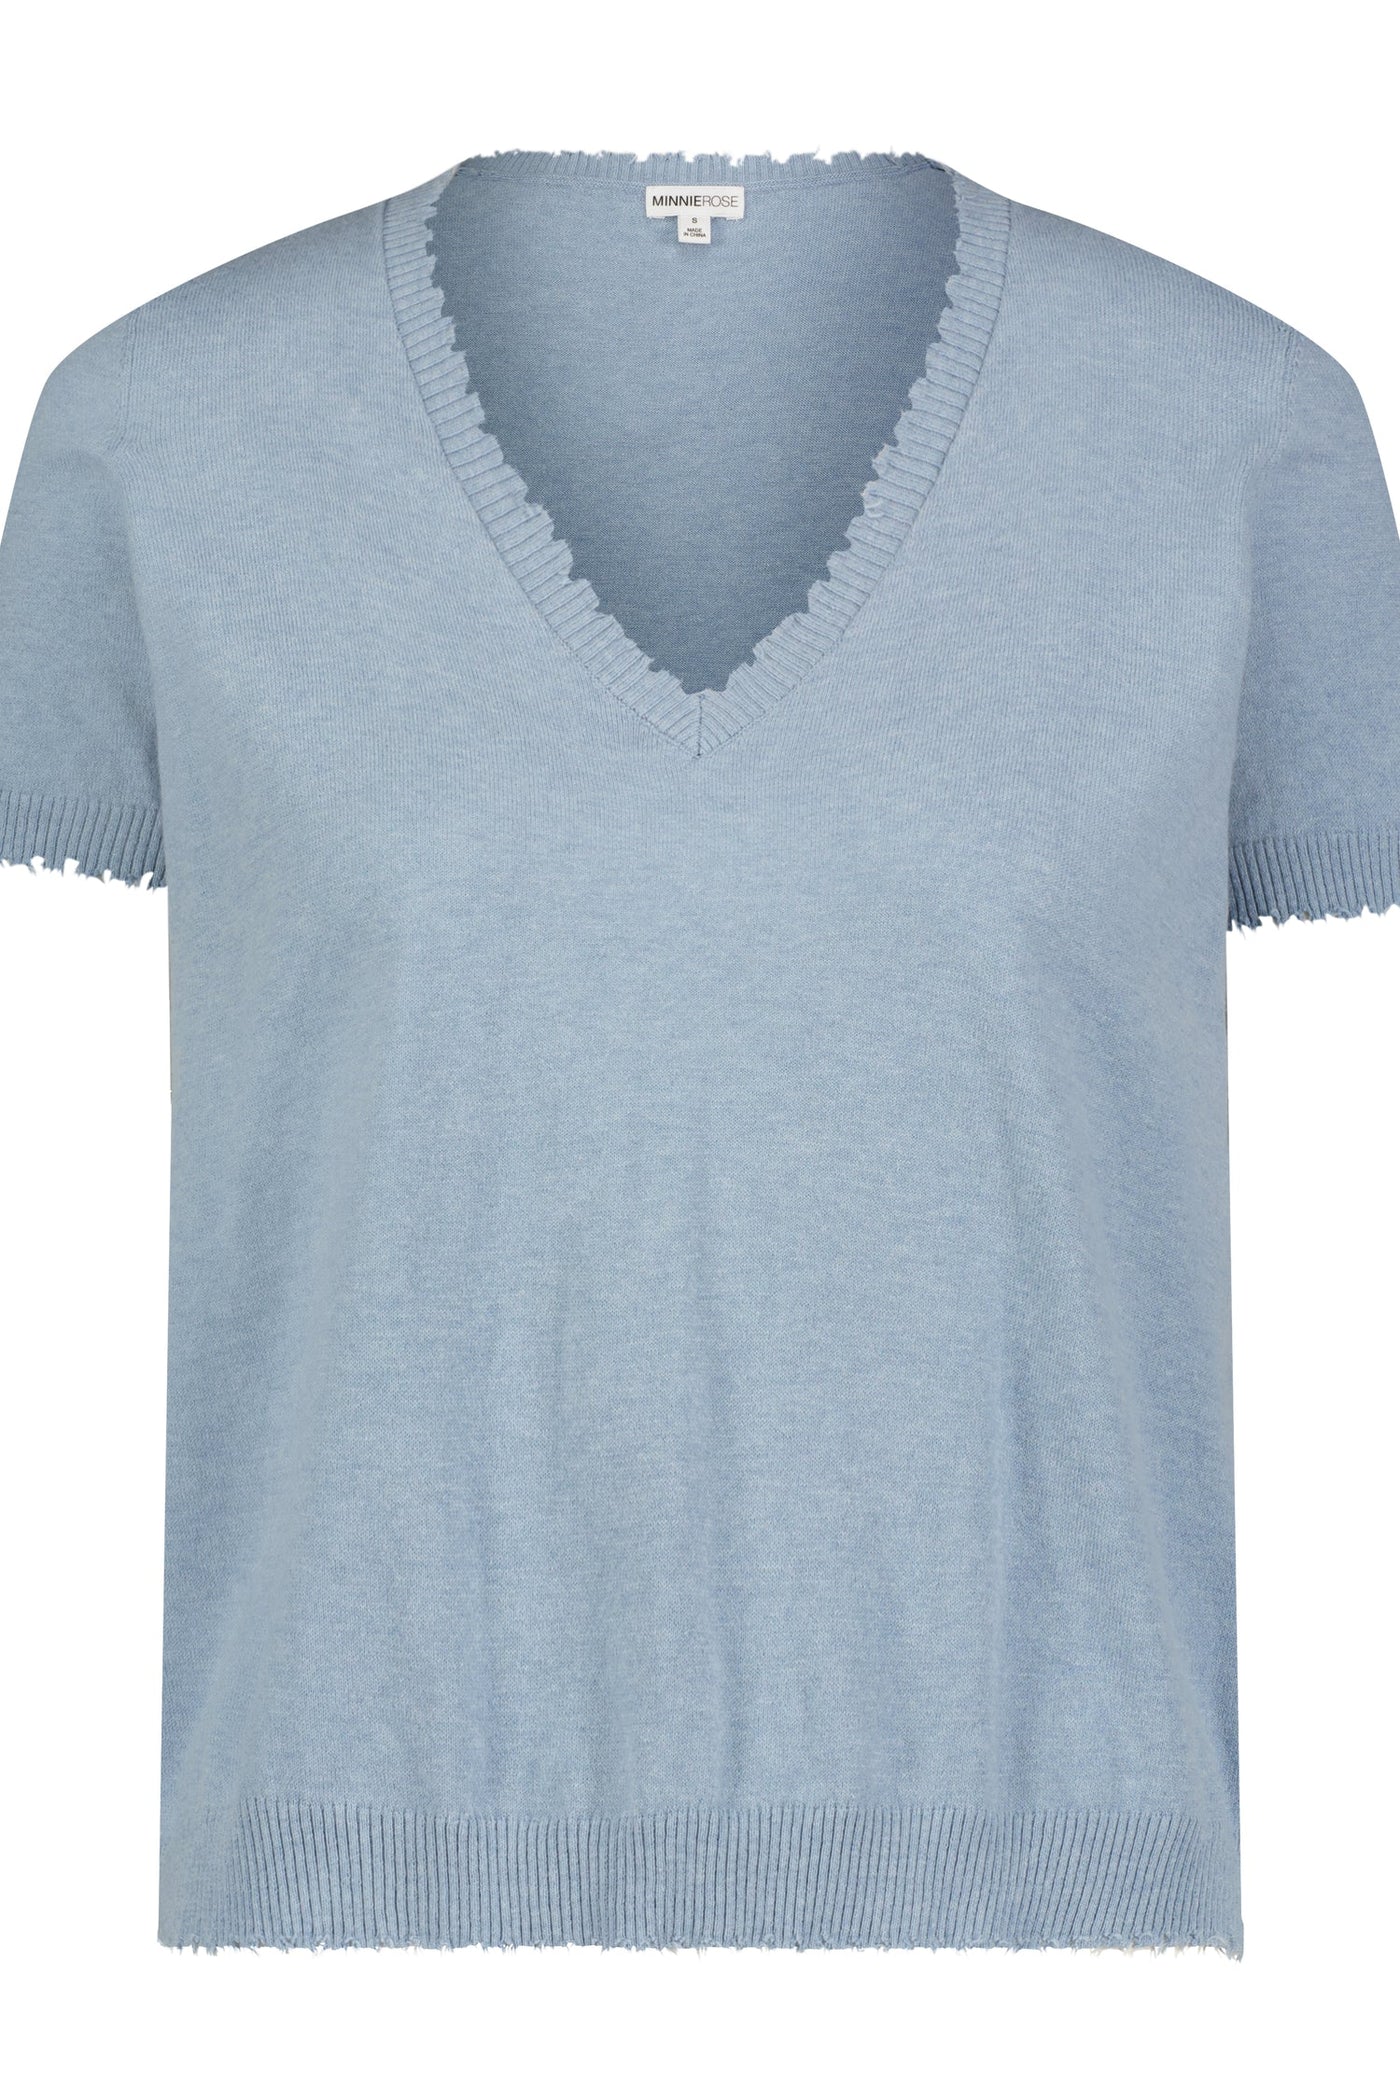 COTTON CASHMERE FRAYED V TEE IN SEASHORE - Romi Boutique